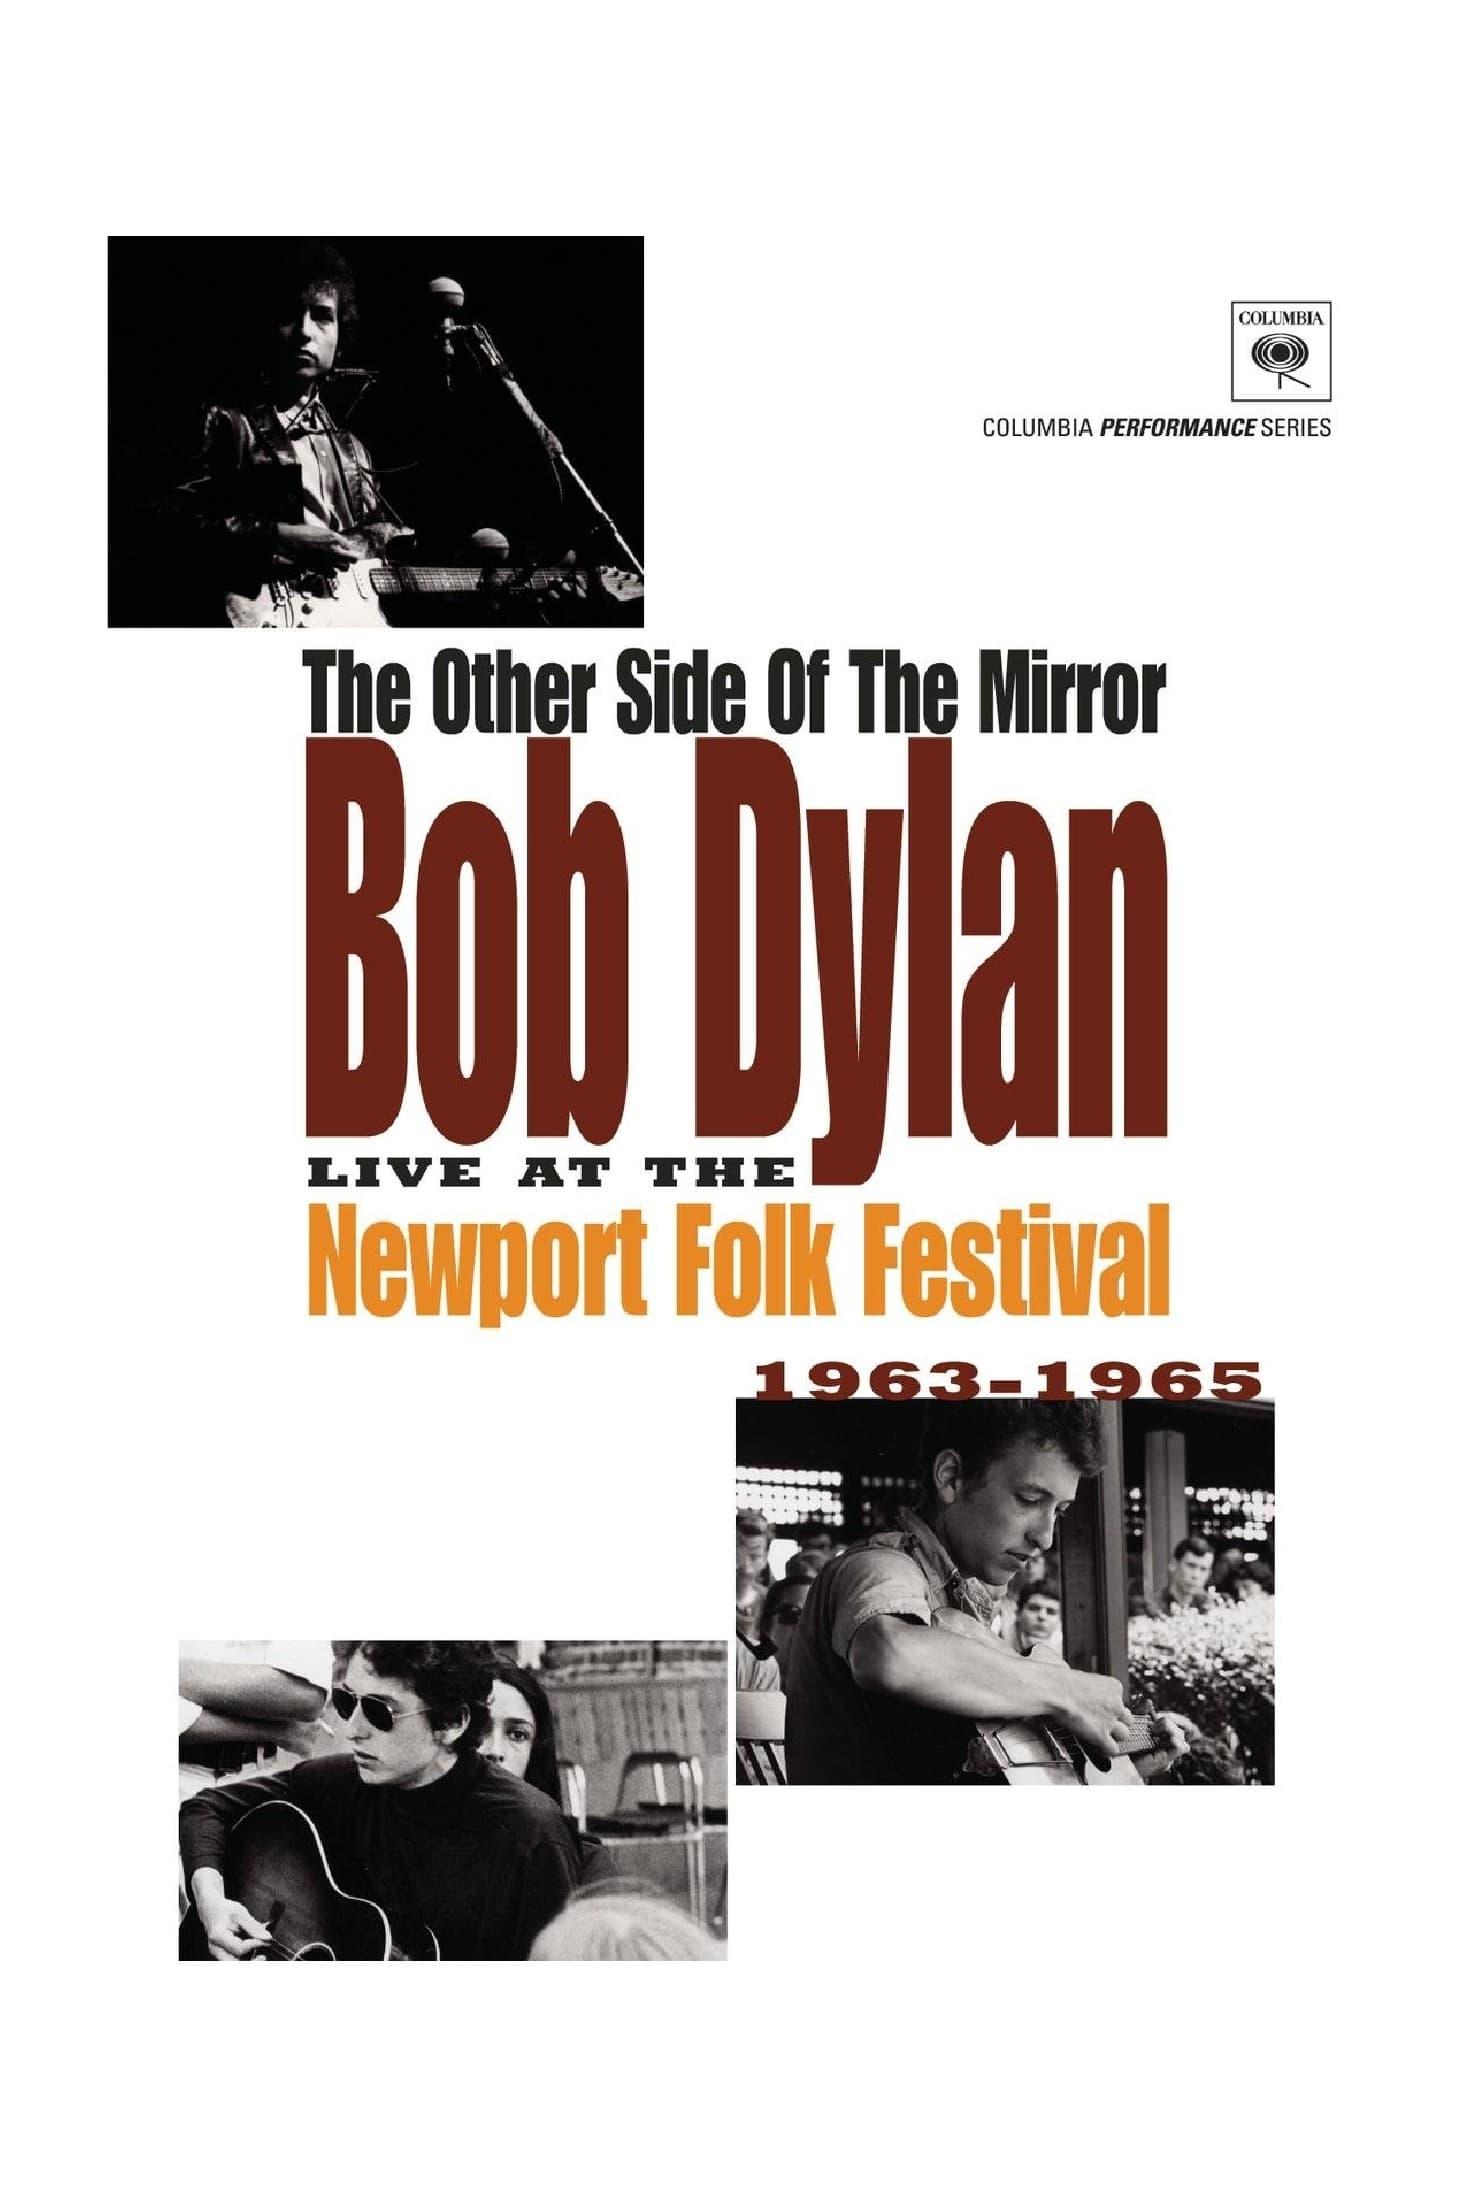 Bob Dylan Live at the Newport Folk Festival - The Other Side of the Mirror poster